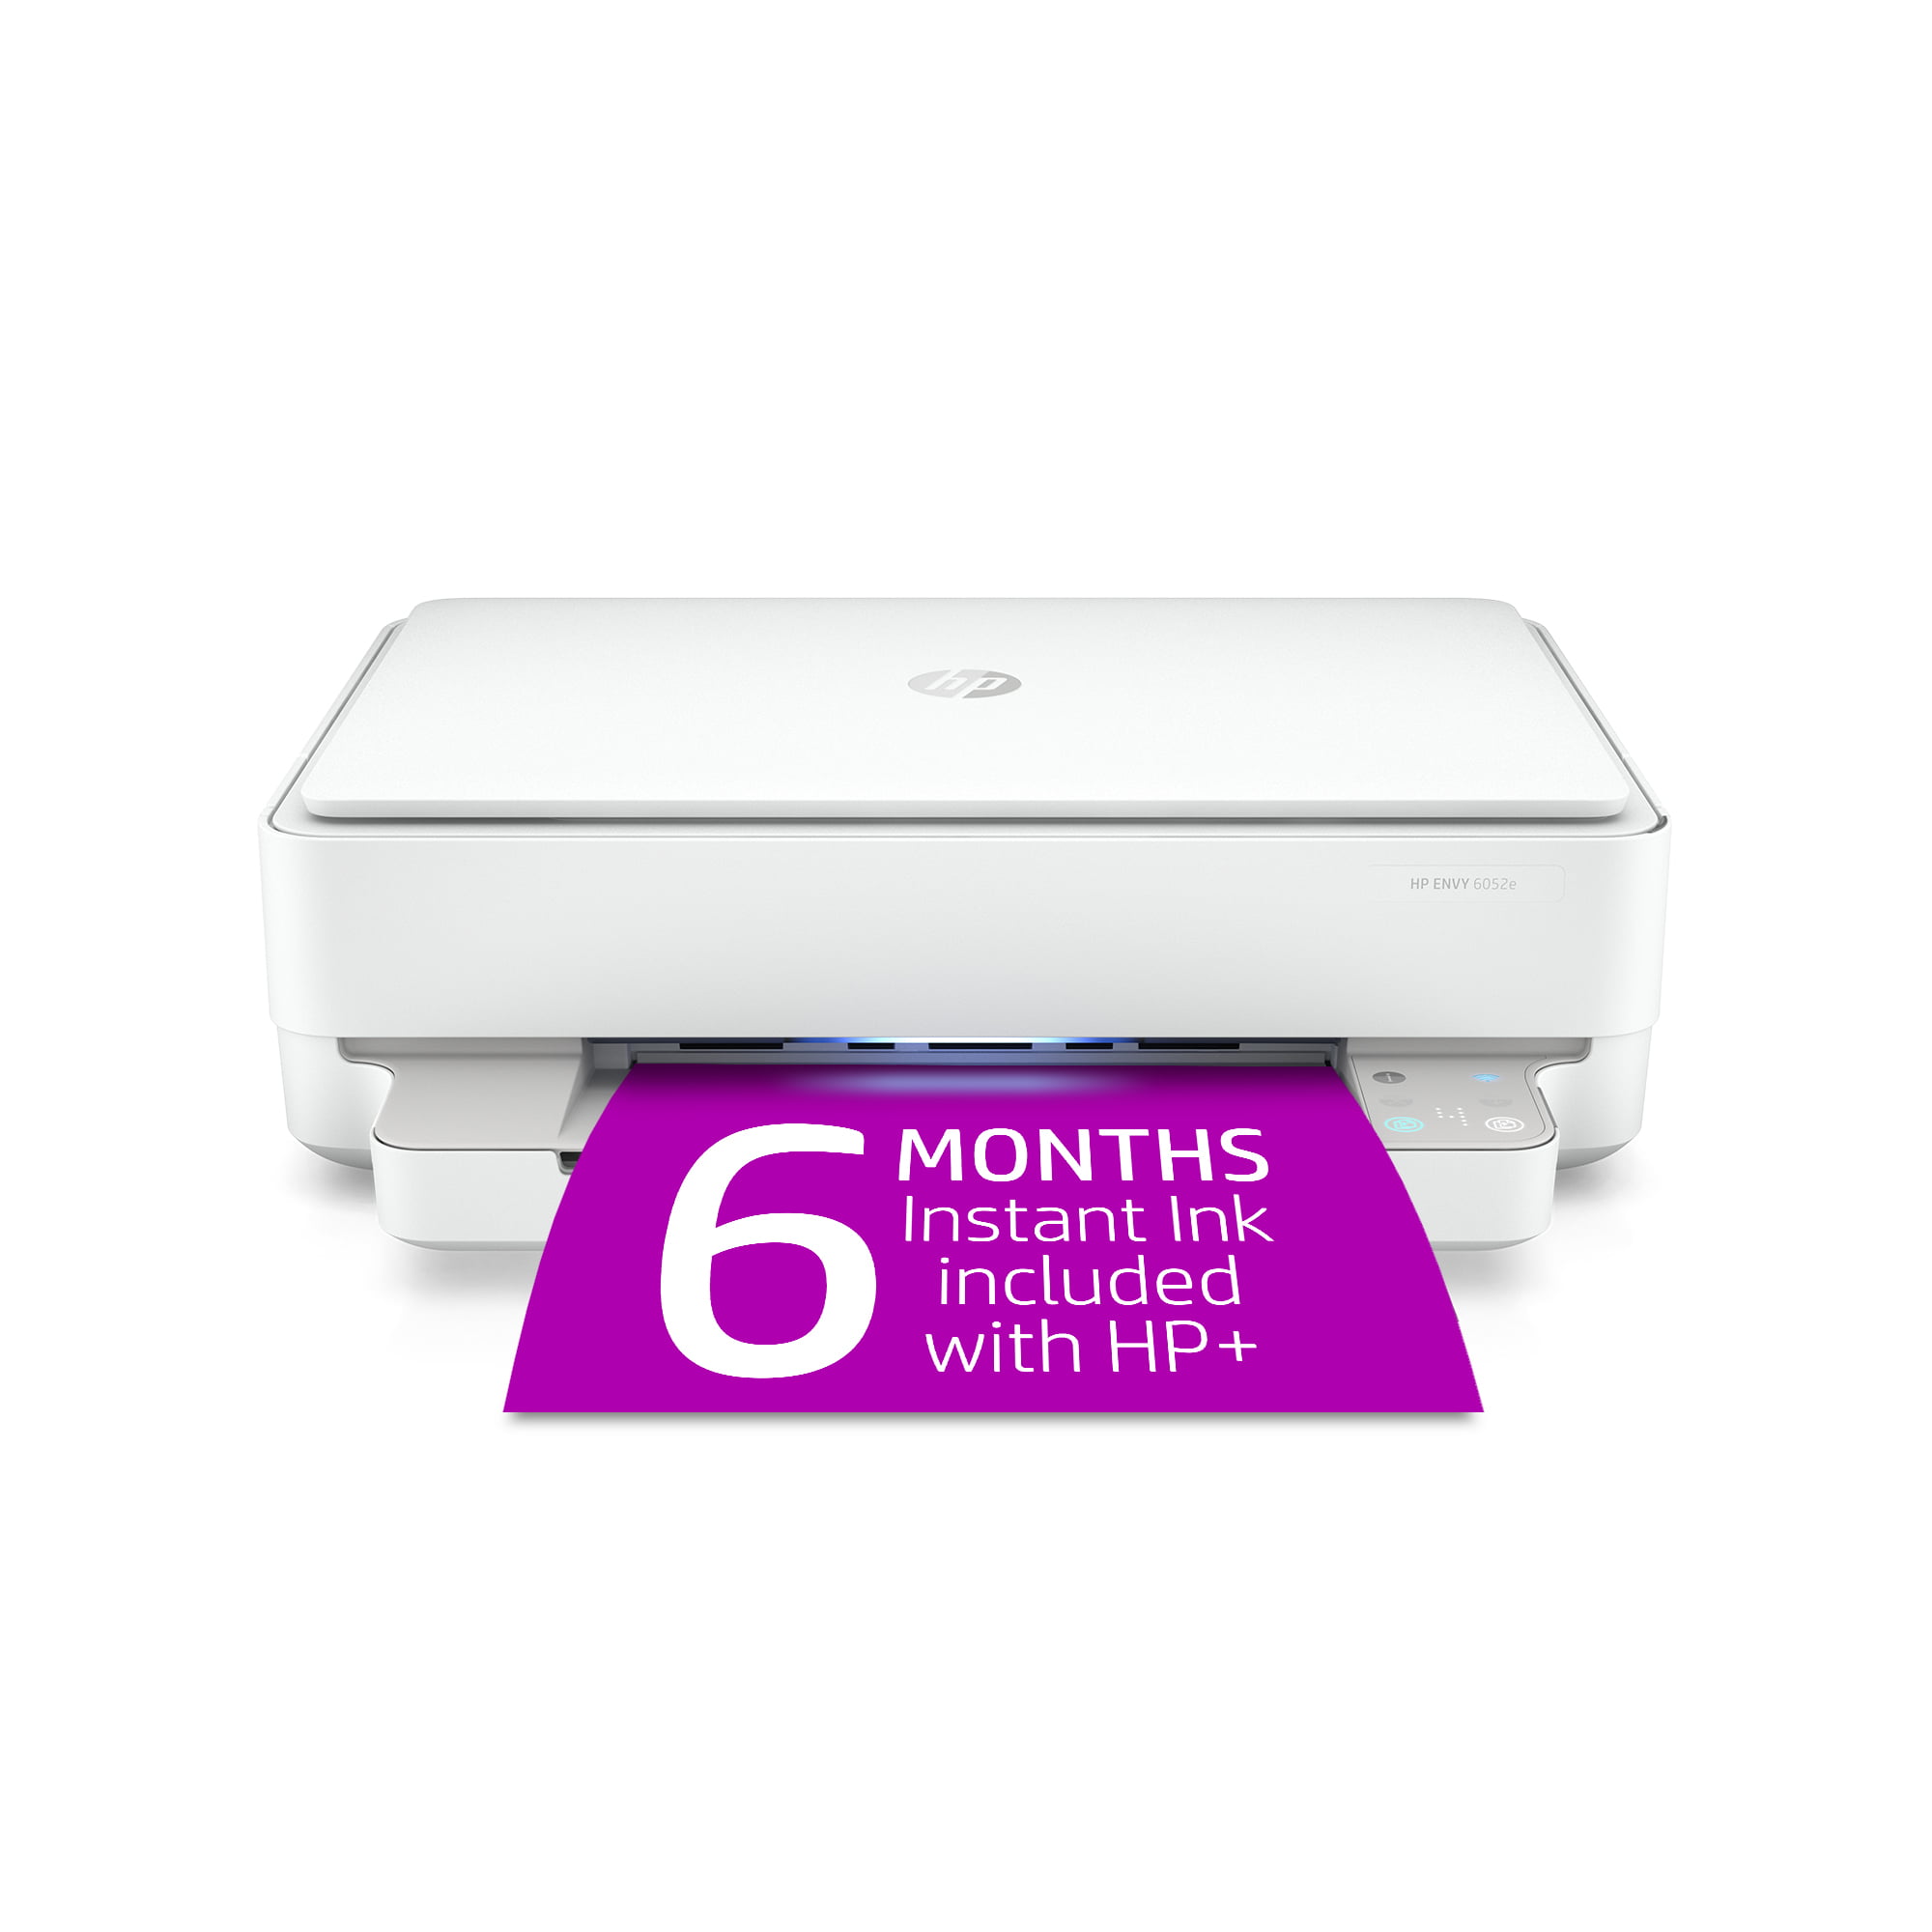 verdediging Eerlijk Charlotte Bronte HP ENVY 6452e All-in-One Wireless Color Inkjet Printer with 6 Months  Instant Ink Included with HP+ - Walmart.com